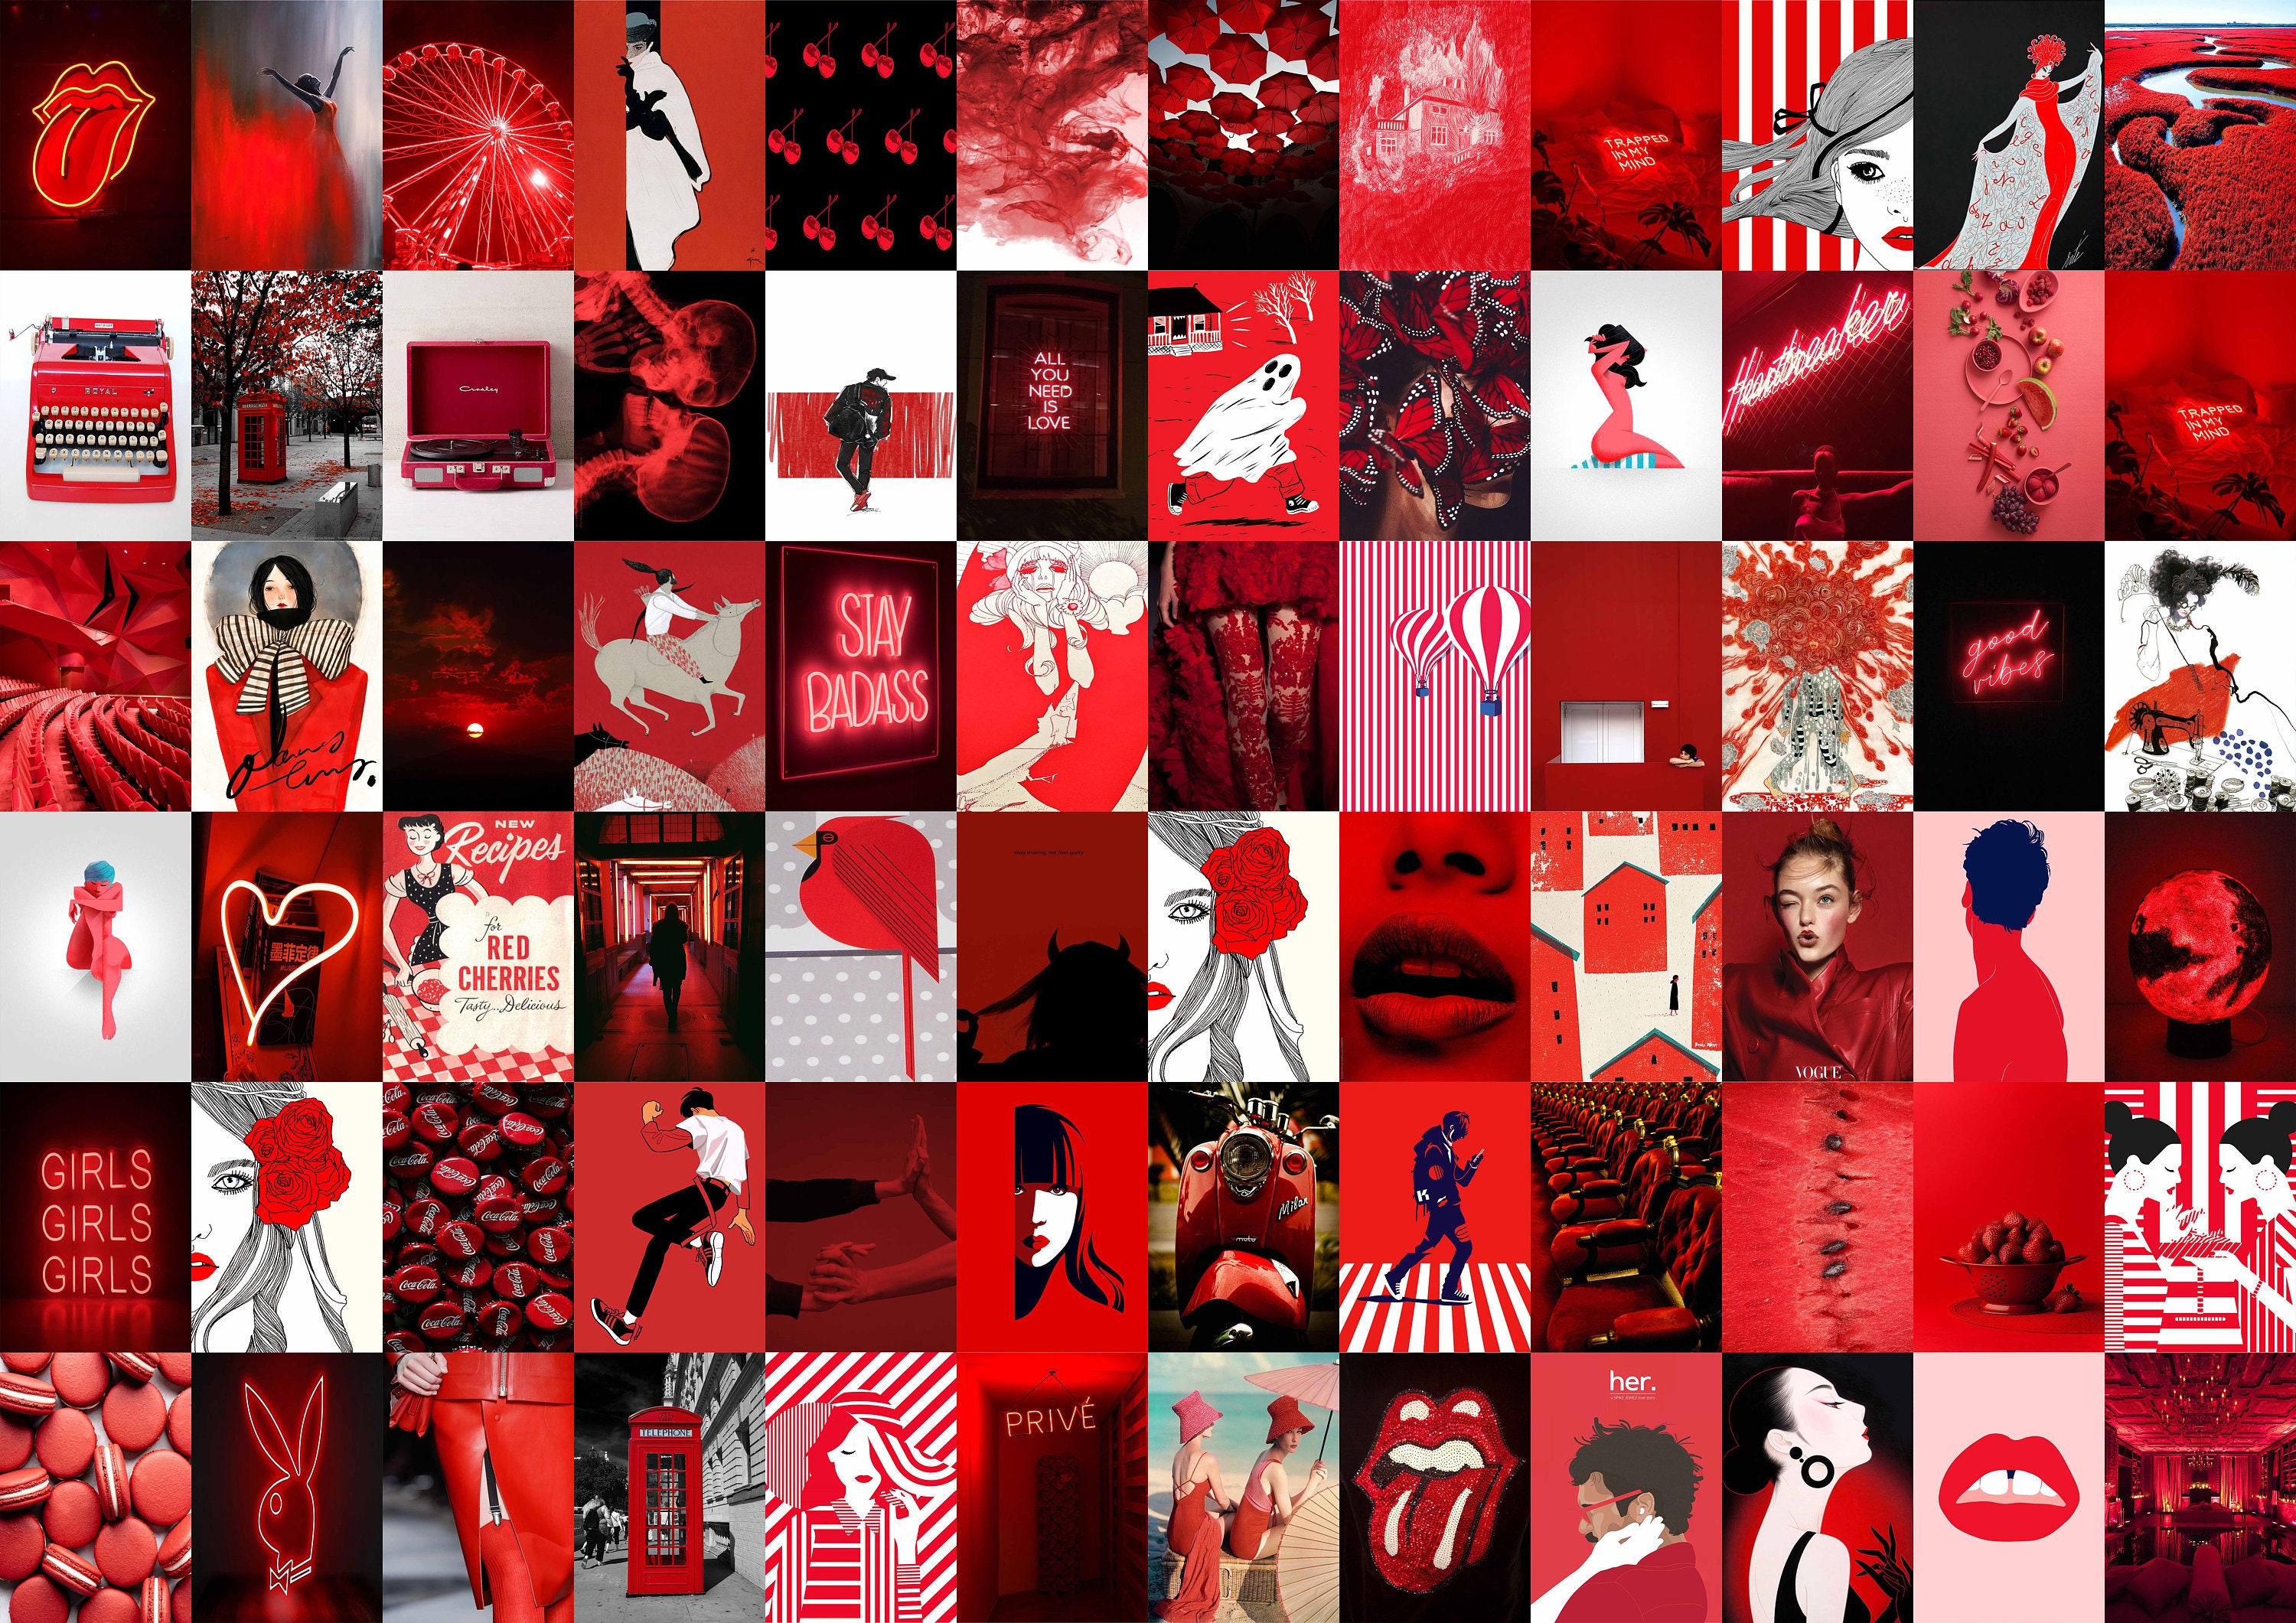 112PCS, Downtown Girl Aesthetic Wall Collage Kit, 90s / Grunge Aesthetic,  Black/red Aesthetic, Aesthetic Collage Kit, Digital Download 